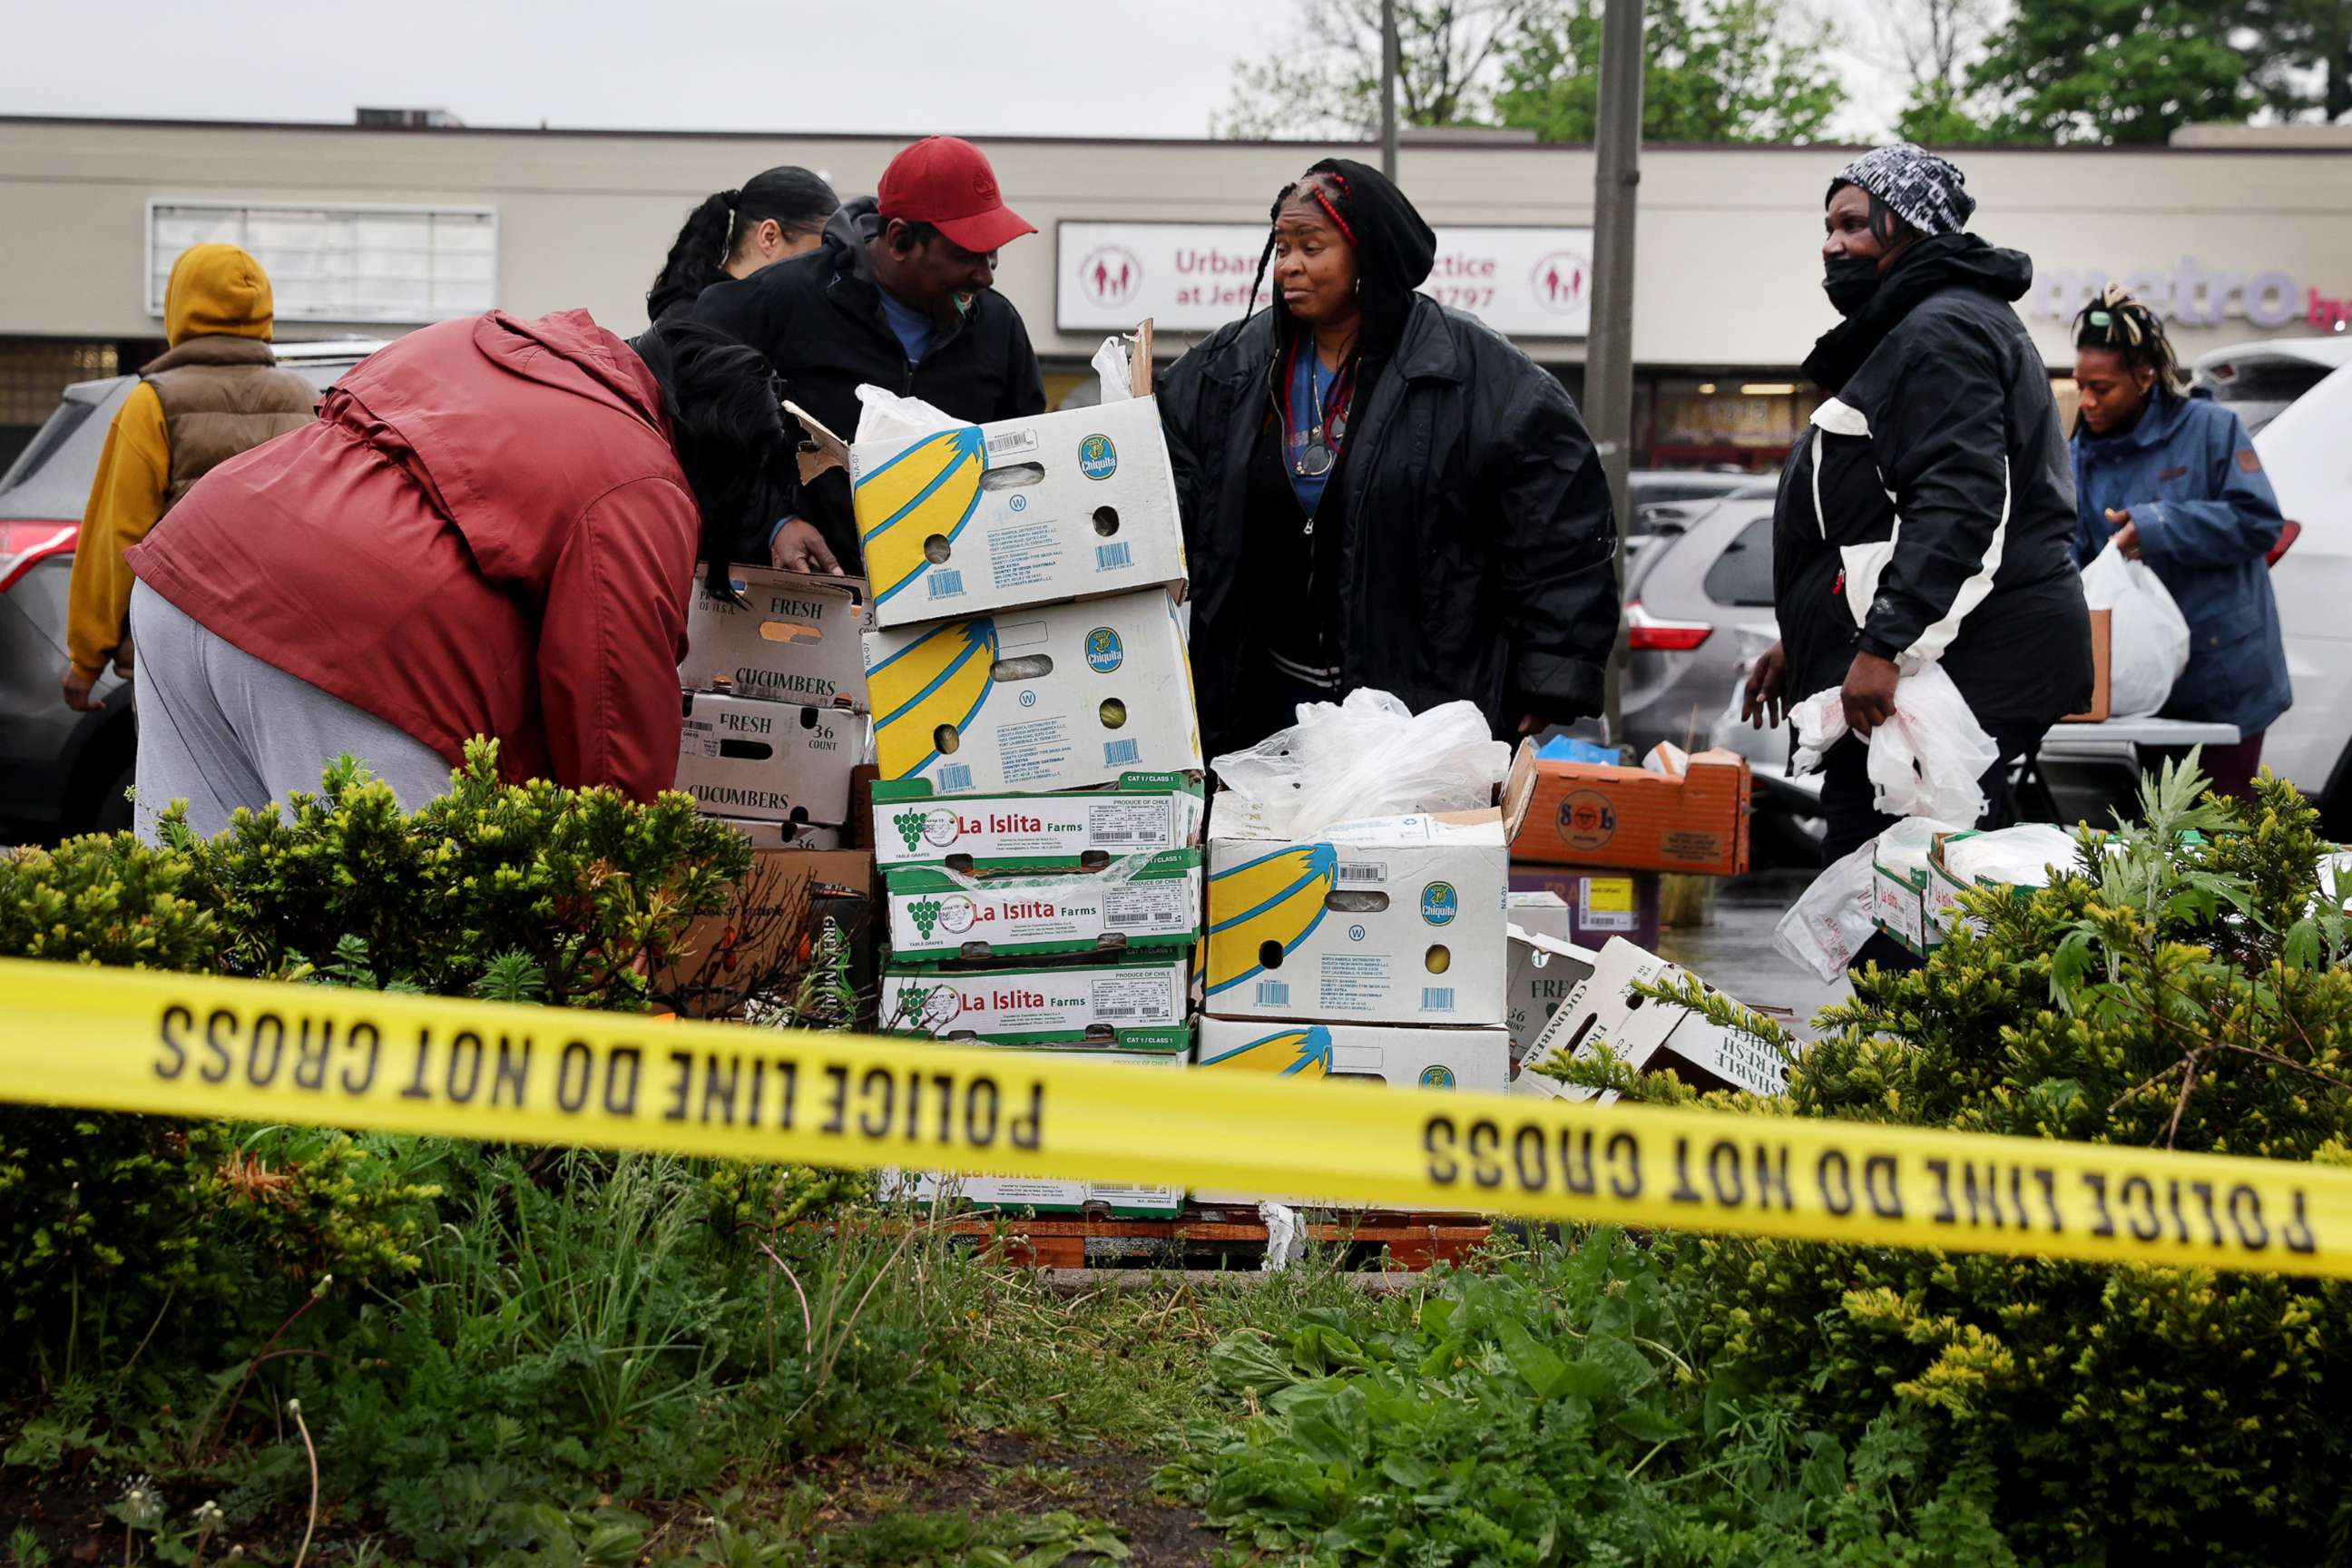 PHOTO: Workers with Rehoboth House of Prayer pass out donated groceries to residents living near the location of the Tops market shooting on May 16, 2022, in Buffalo, New York.